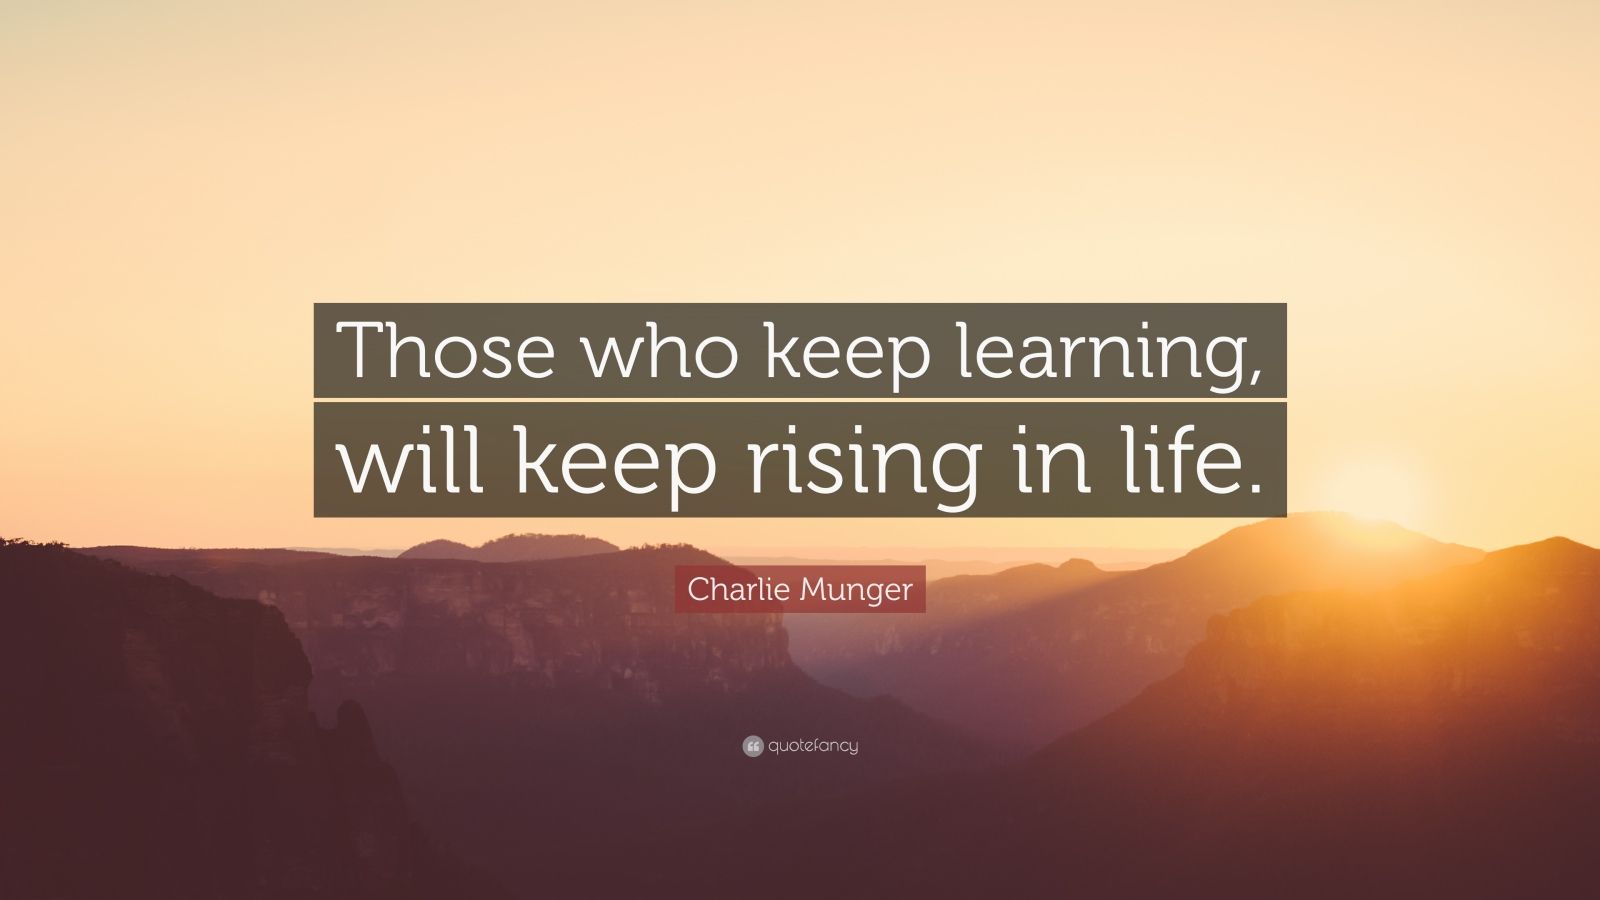 Charlie Munger Quote: “Those who keep learning, will keep rising in life.”